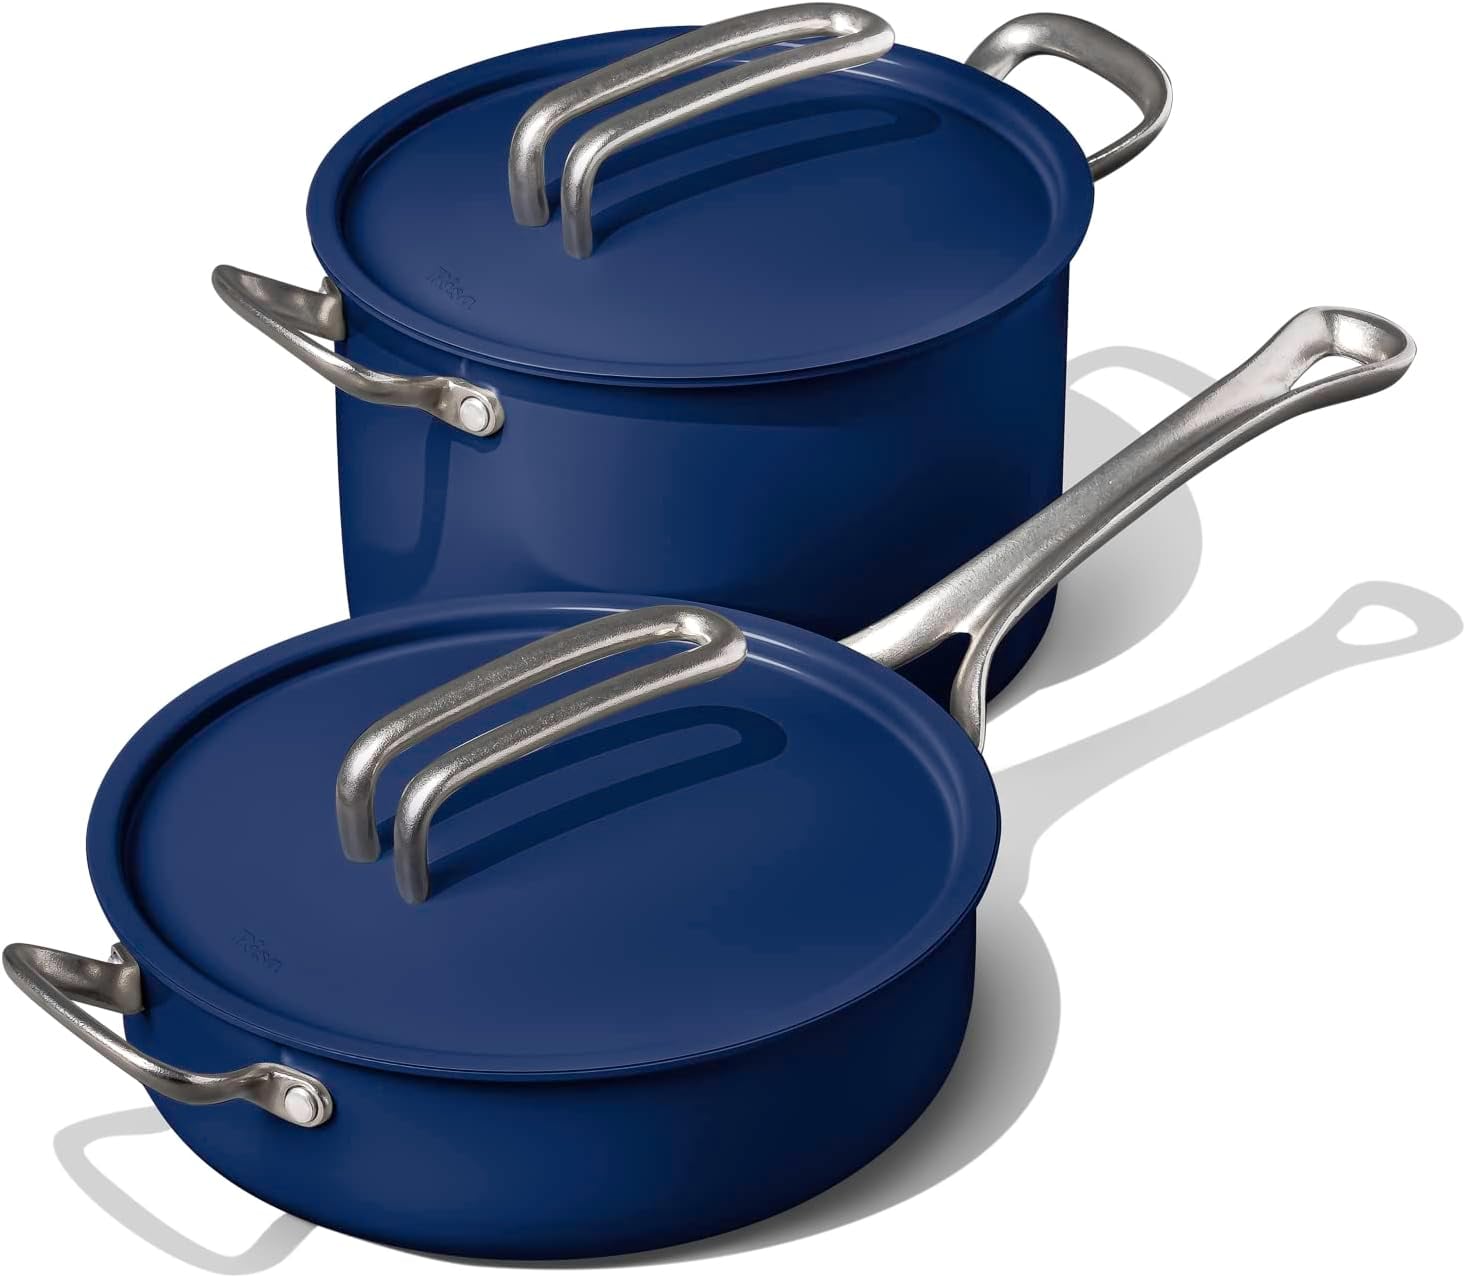 Top 5 Best Non Stick Cookware Sets of 2023 